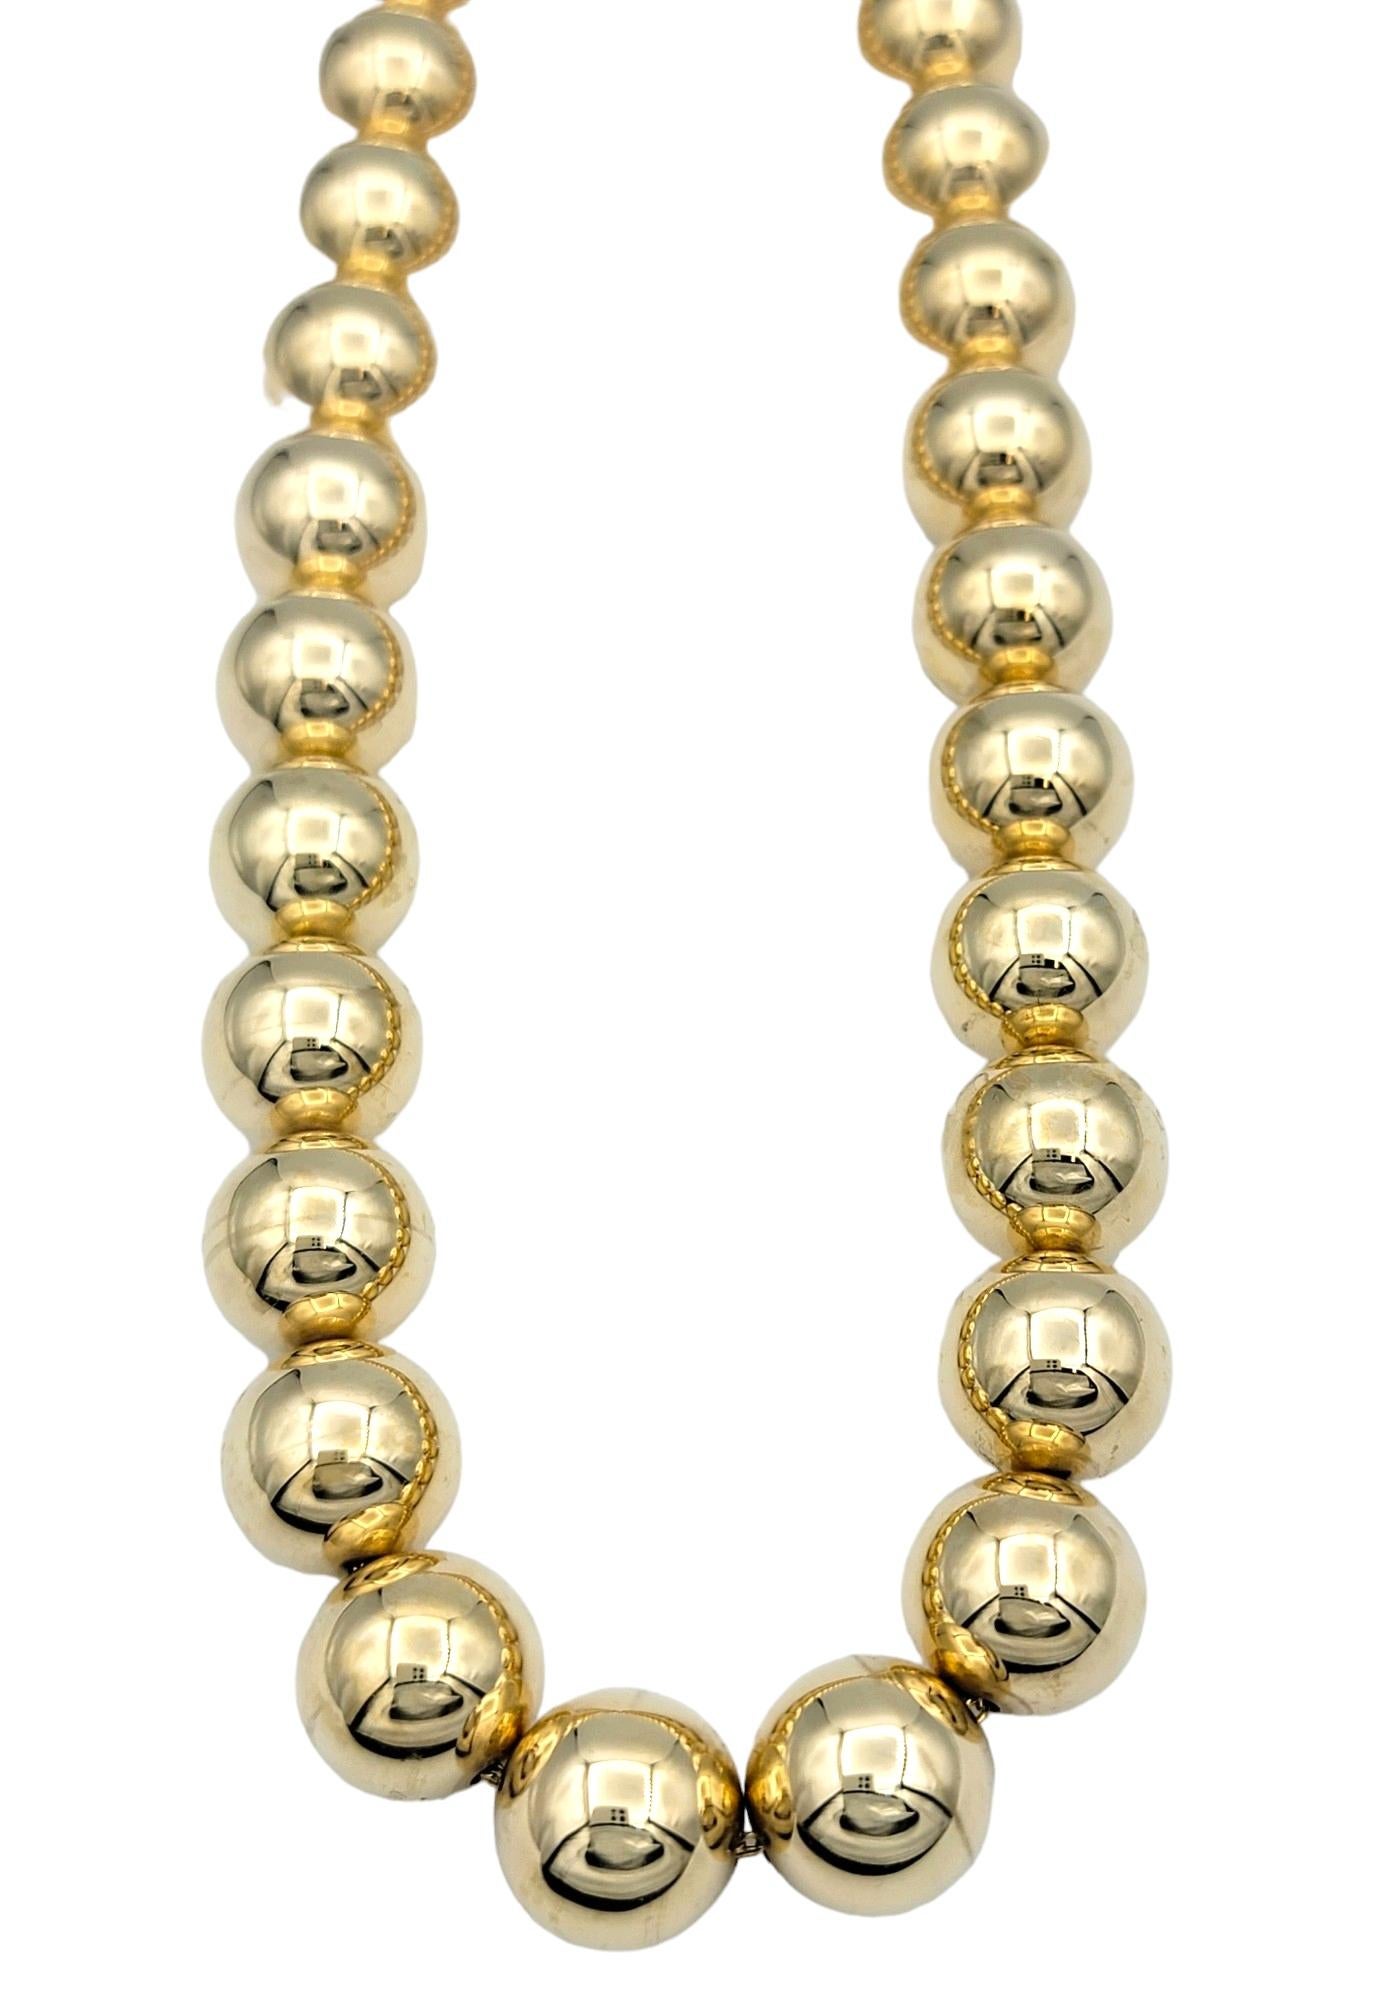 This gorgeous 14 karat gold necklace boasts a stunning design featuring large ball beads crafted from high-polish gold. The spherical beads, meticulously finished to achieve a mirror-like shine, create a mesmerizing display of brilliance and